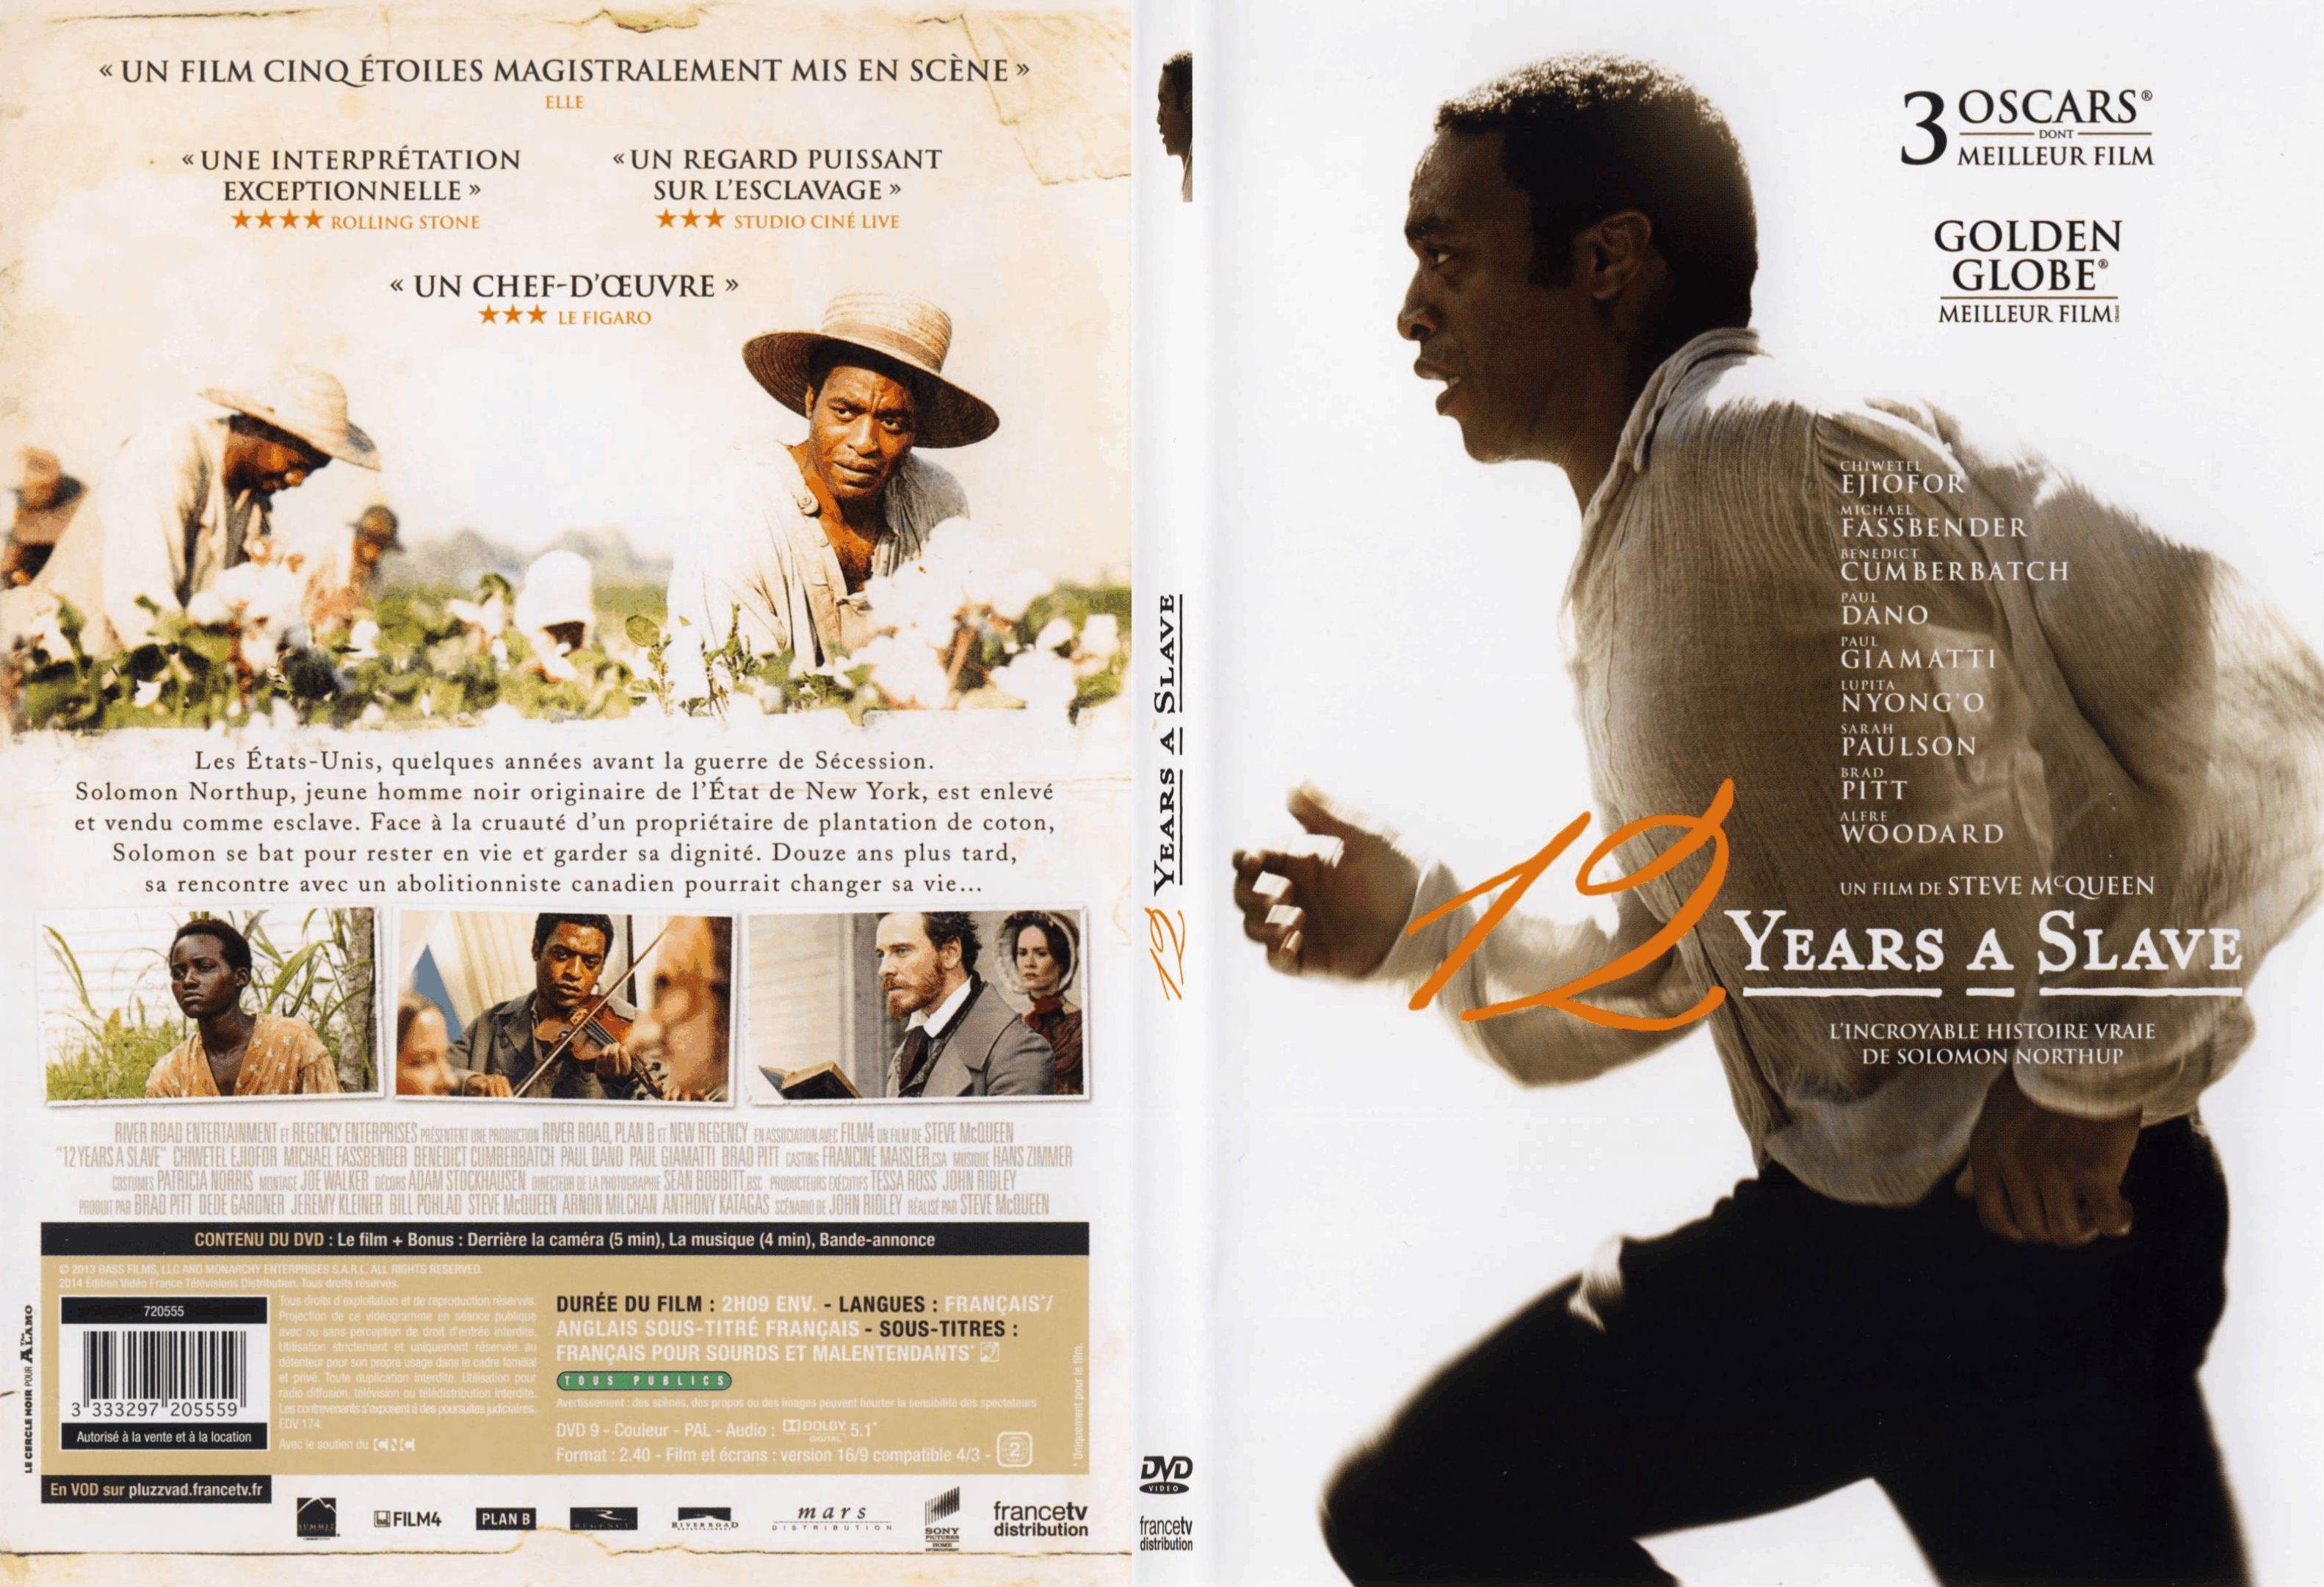 Jaquette DVD 12 years a slave - SLIM